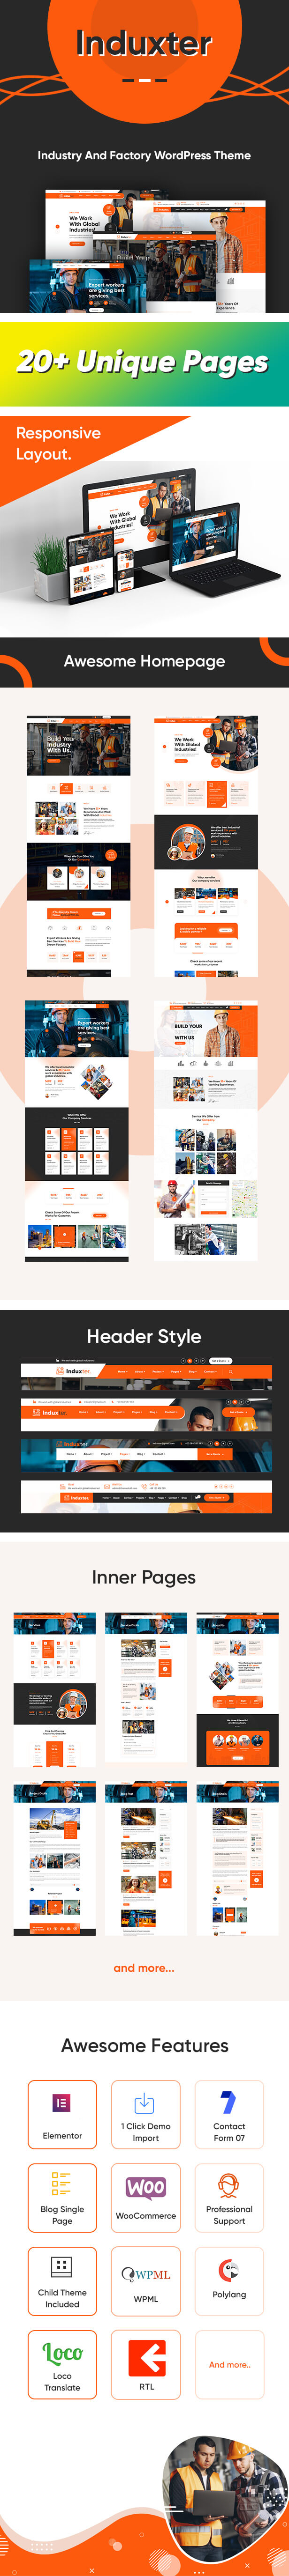 Induxter - Industry And Factory WordPress Theme - 4